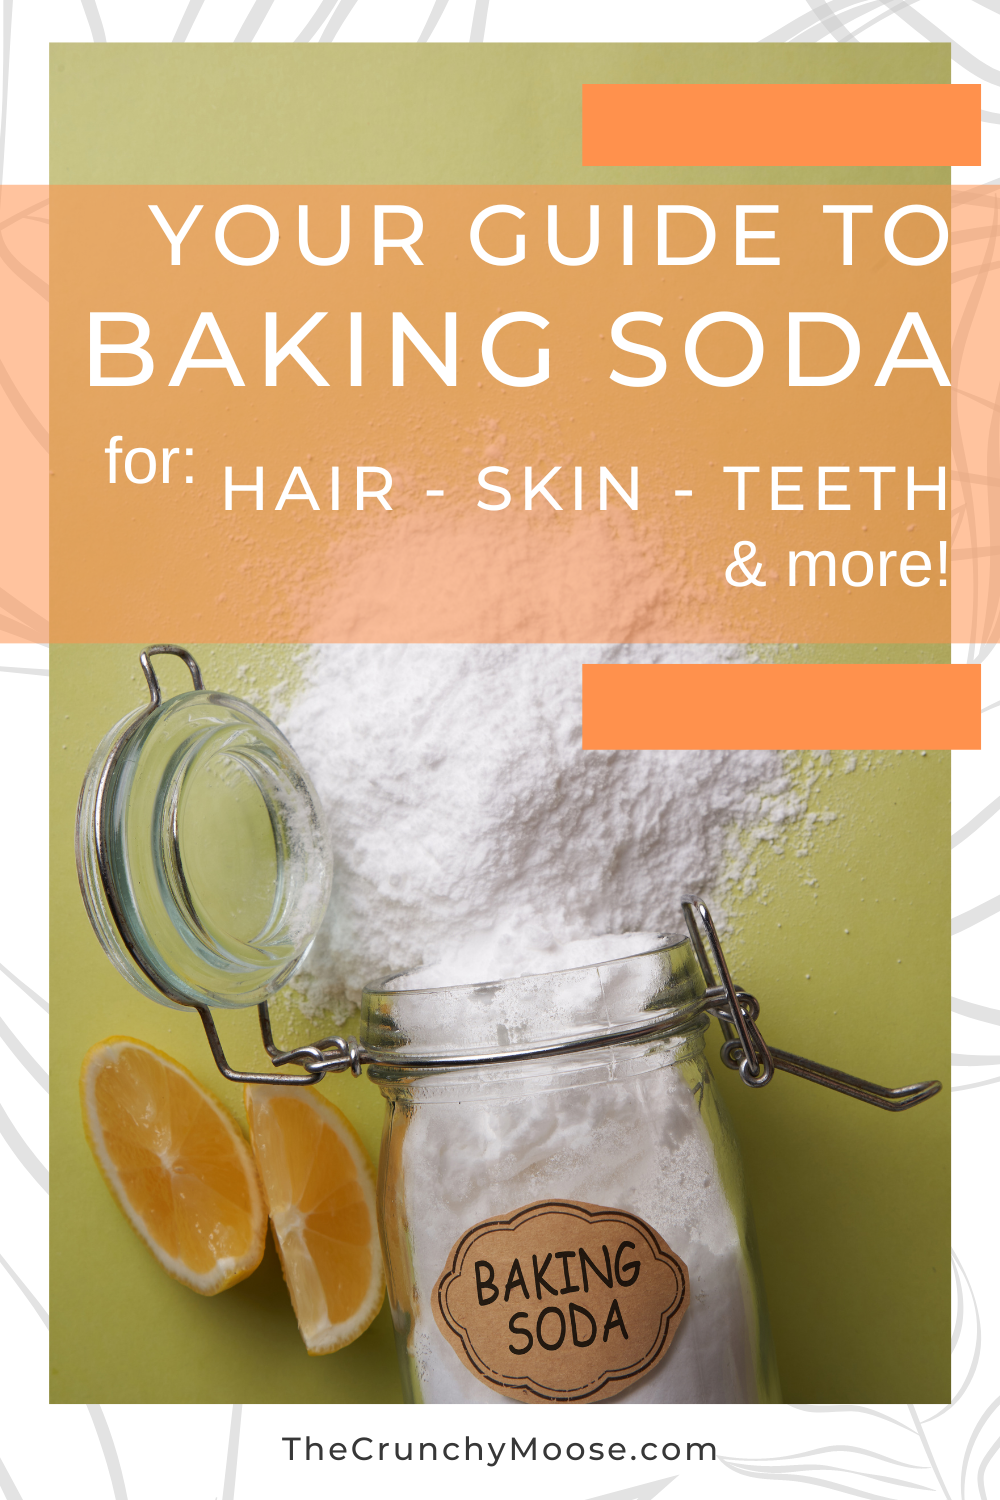 how to use baking soda for hair, skin, and teeth